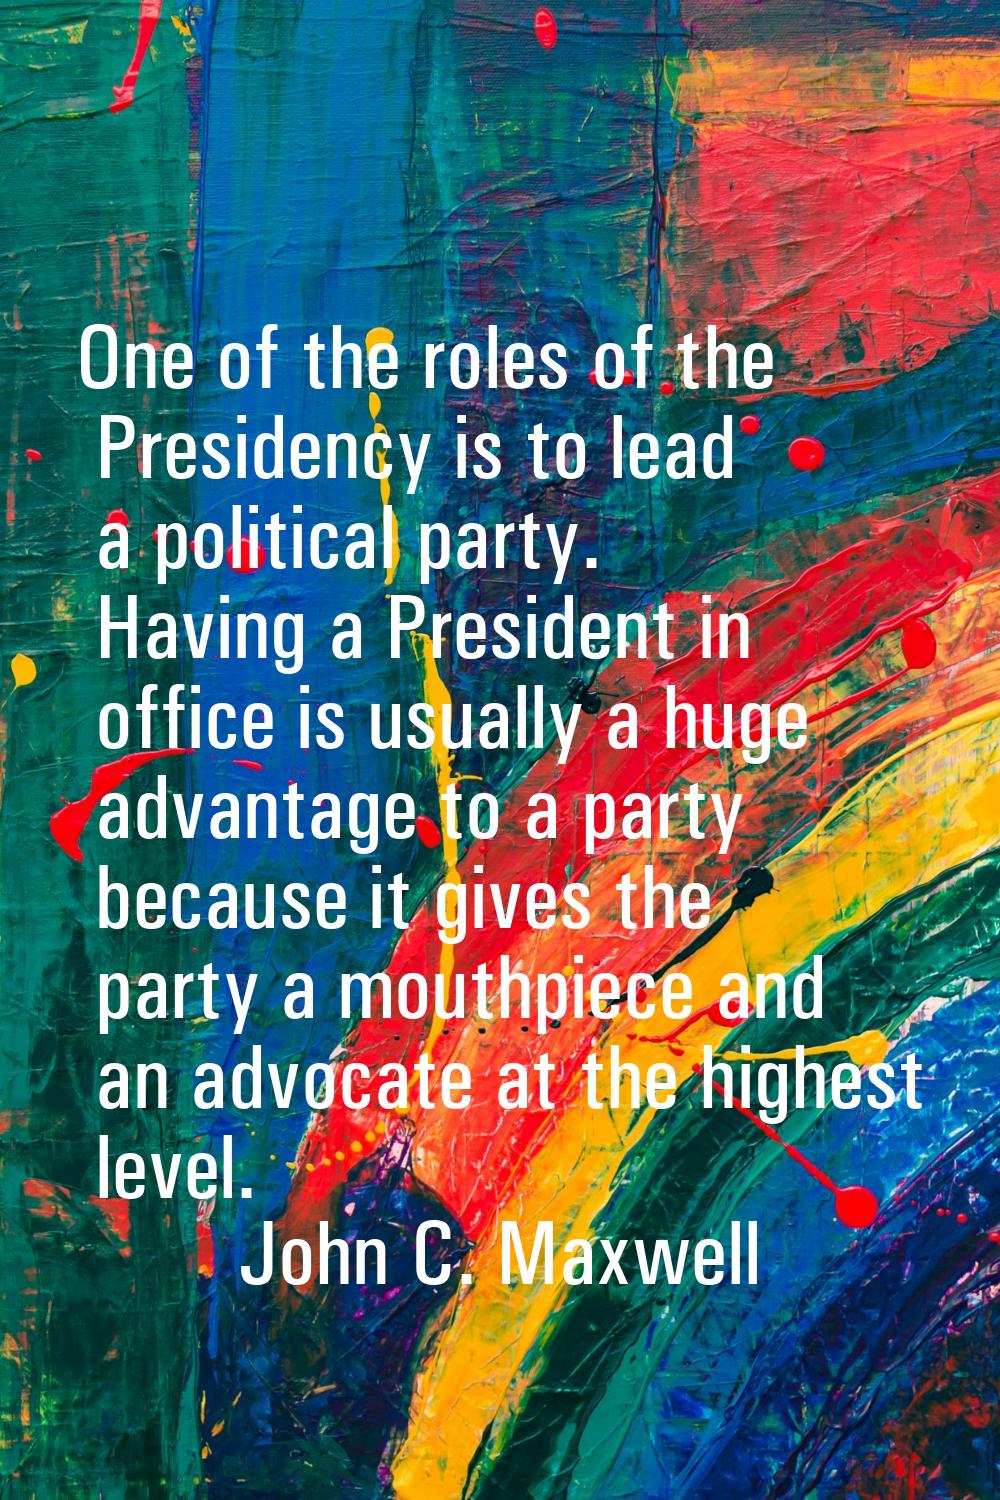 One of the roles of the Presidency is to lead a political party. Having a President in office is us